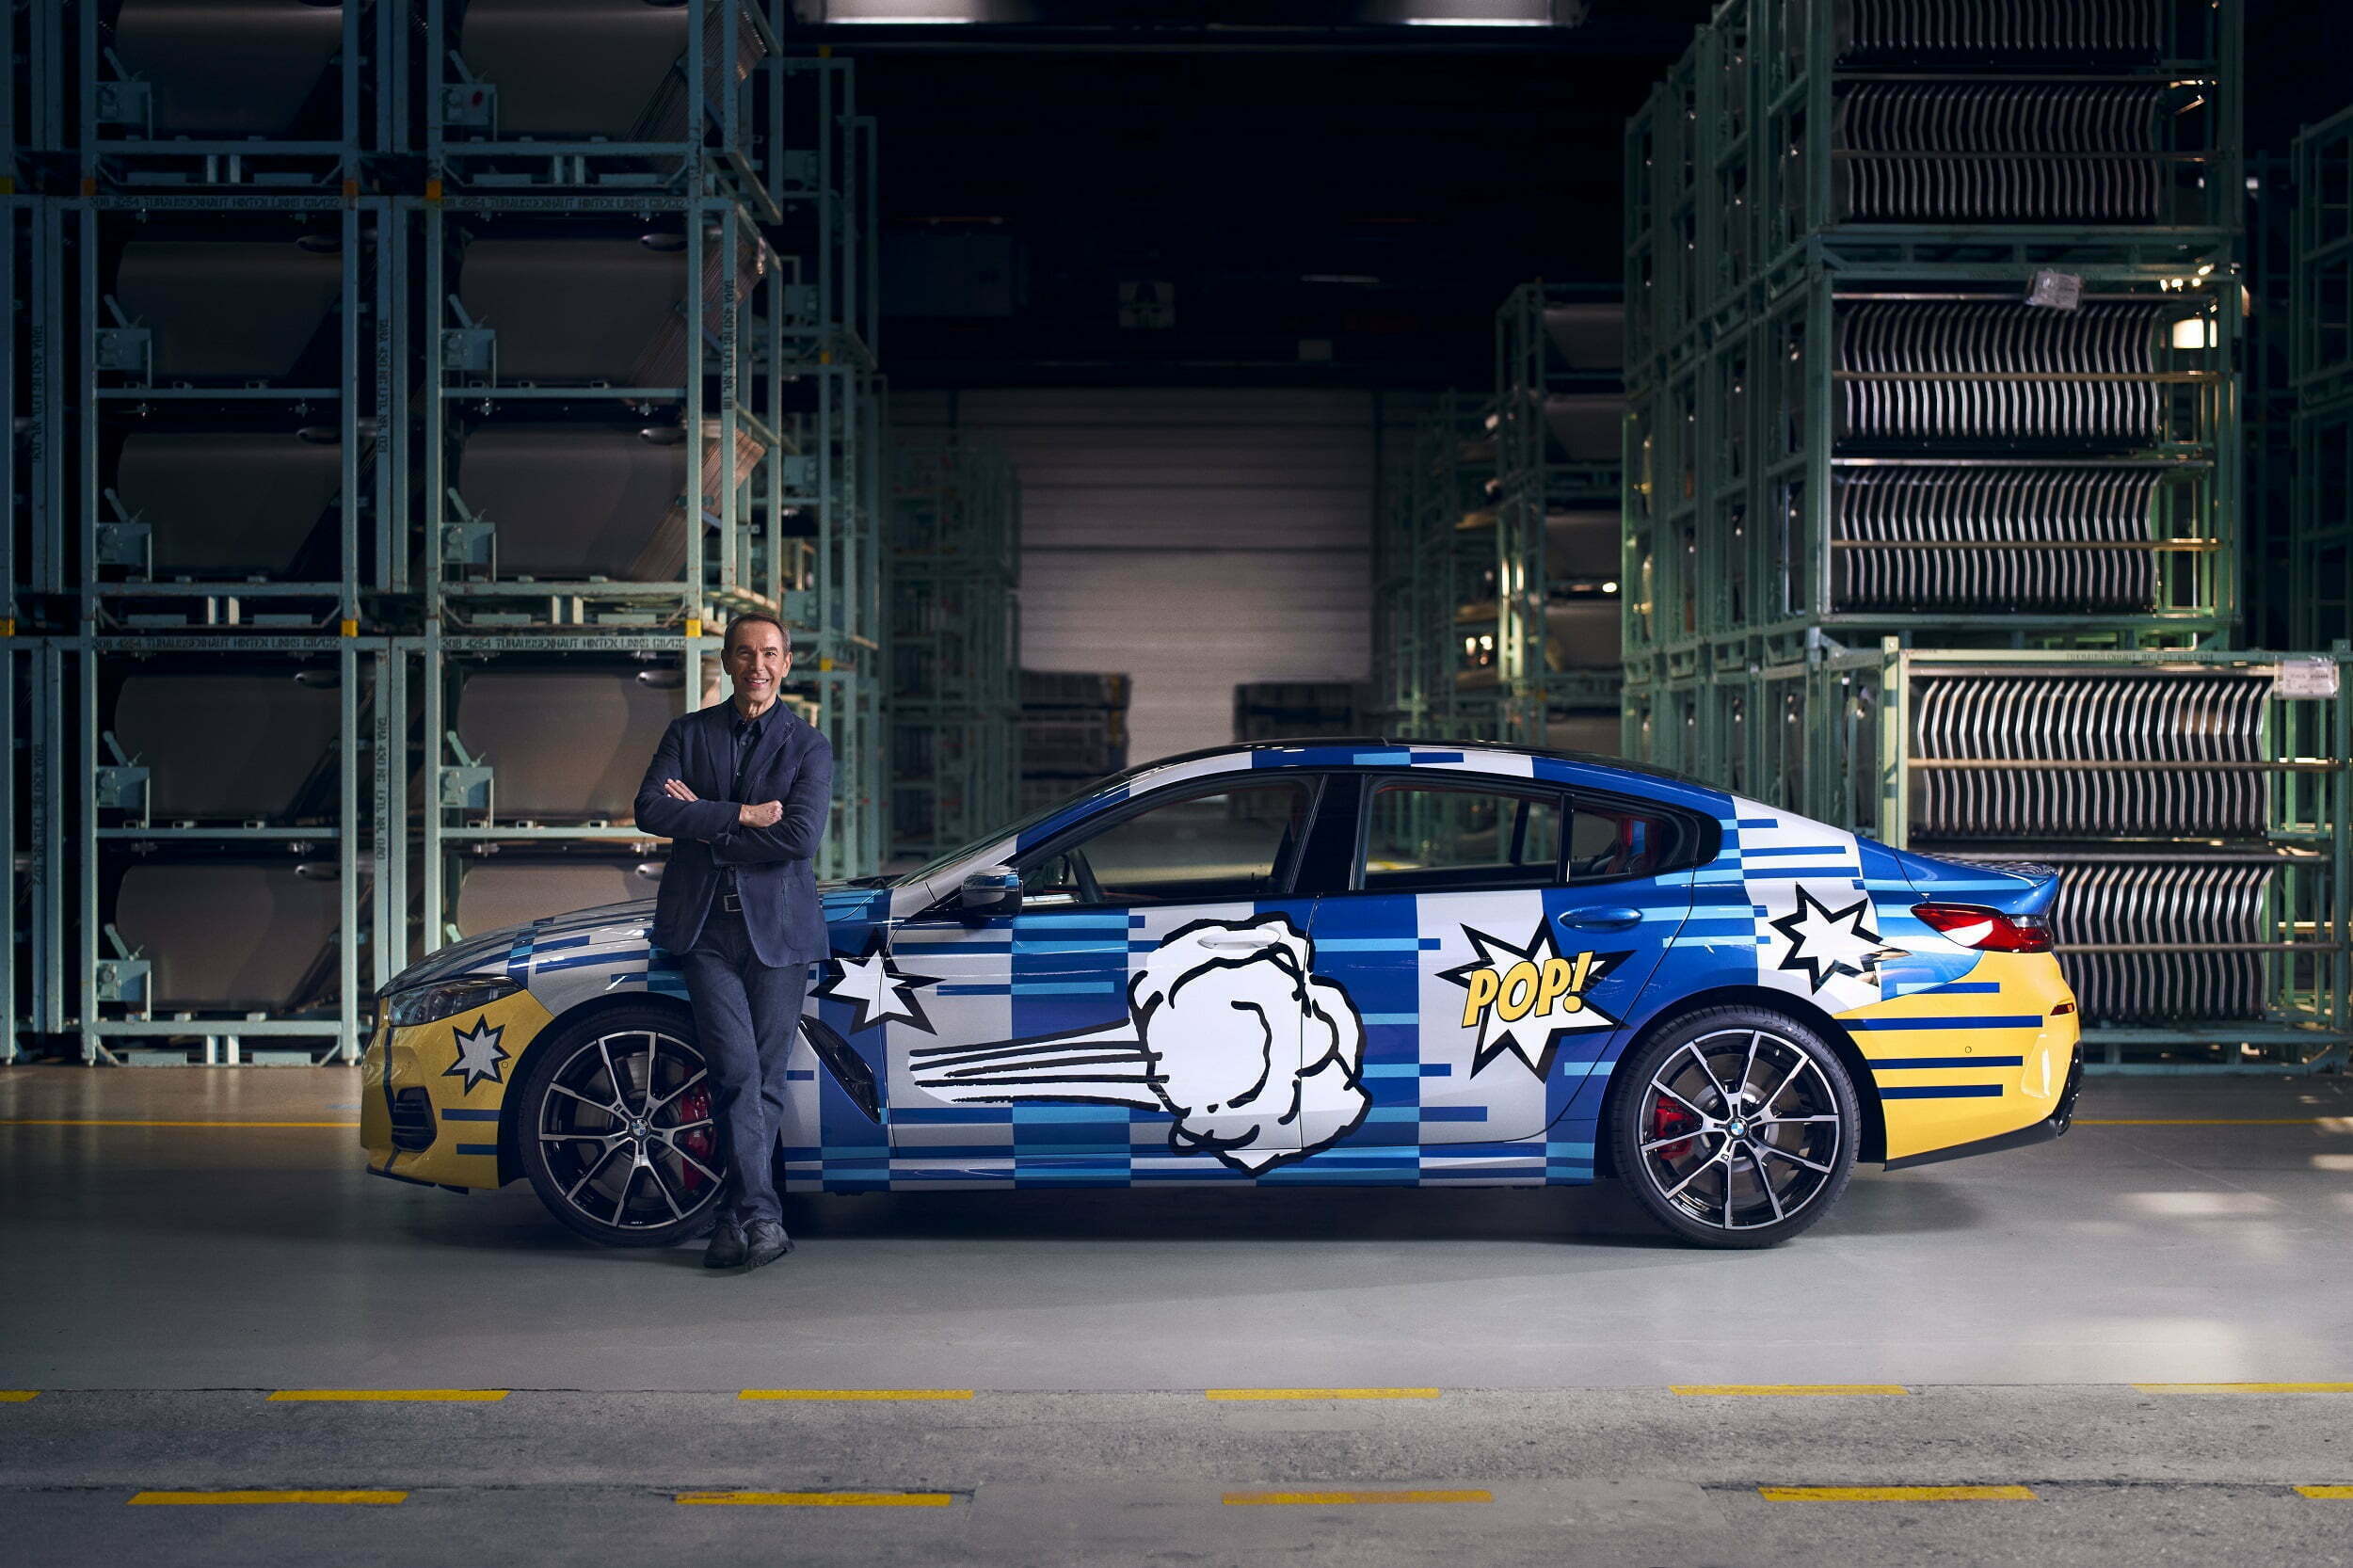 BMW 8 Series Jeff Koons Art Car Is Absolutely Stunning Like BMW Any Art Car Of The Past (1)